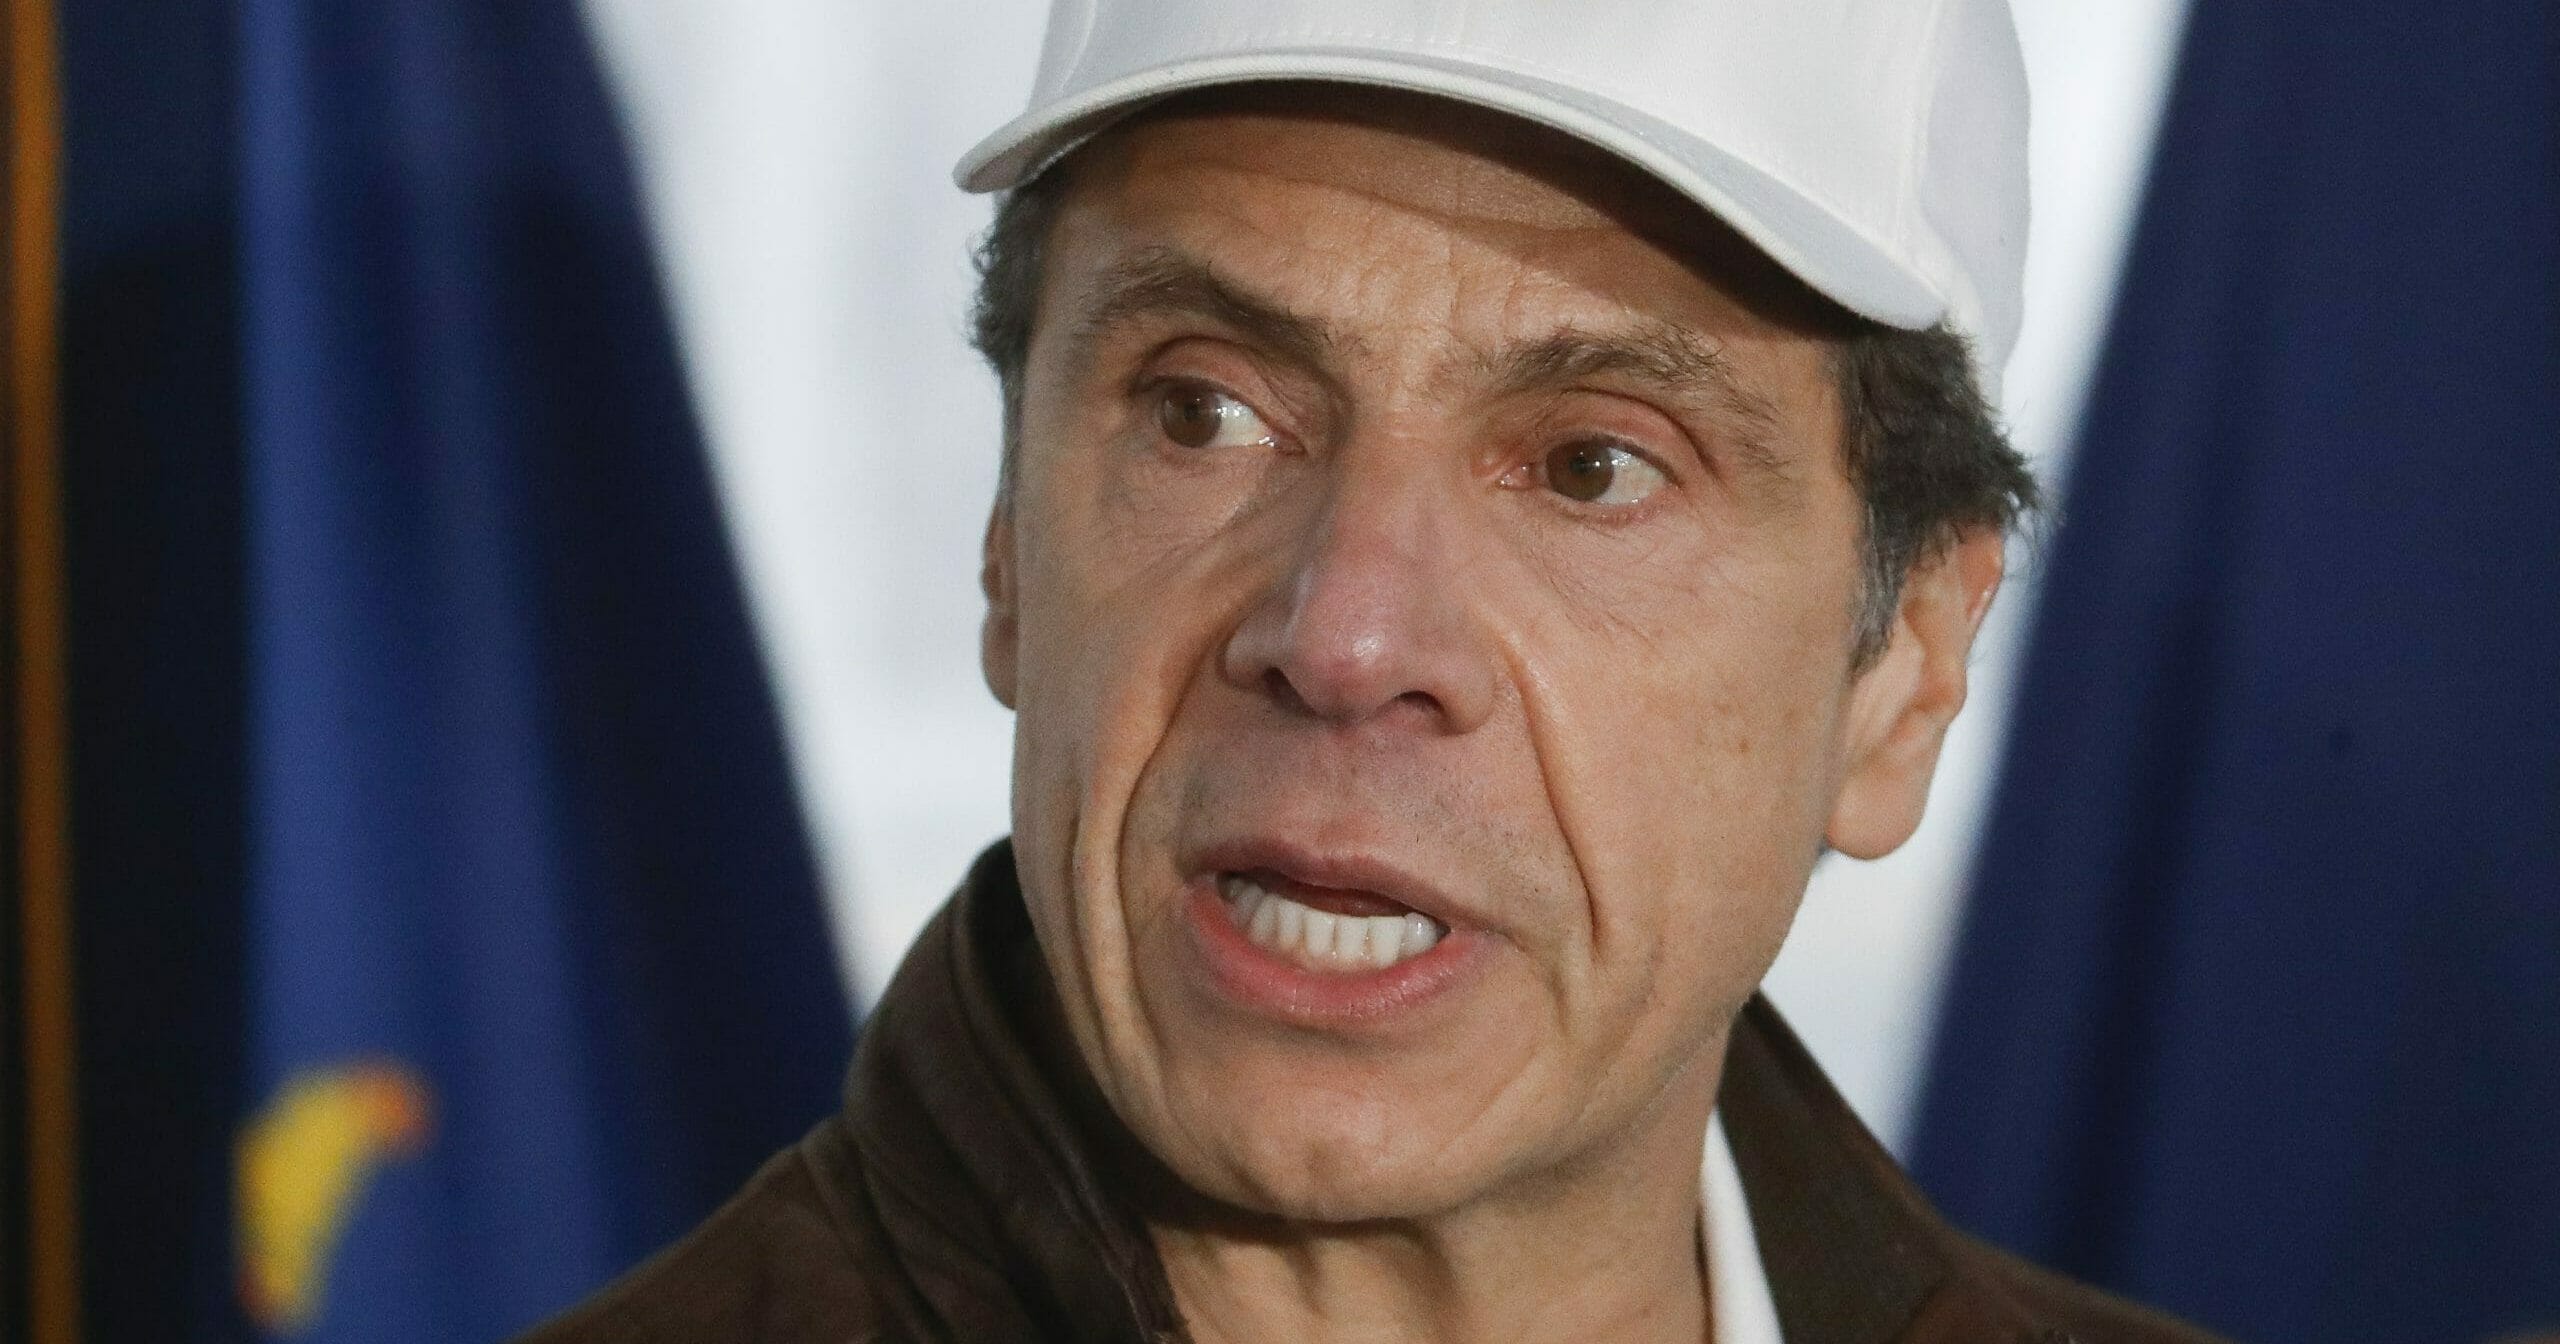 New York Gov. Andrew Cuomo speaks during a news conference at a coronavirus infection testing facility at Glen Island Park in New Rochelle on March 13, 2020.